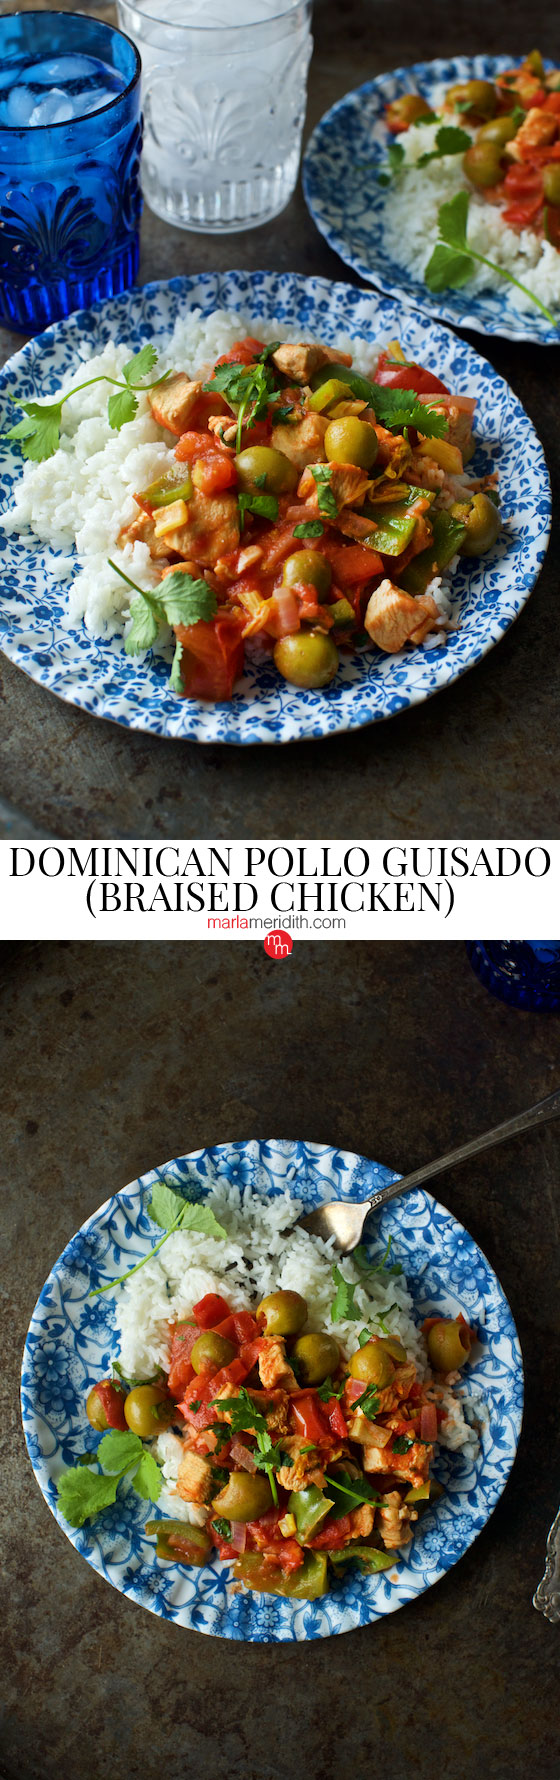 Try this Dominican Pollo Guisado (Braised Chicken) recipe. Inspired by my @Carnival cruise to the Dominican Republic #carnivalpartner | MarlaMeridith.com ( @marlameridith )